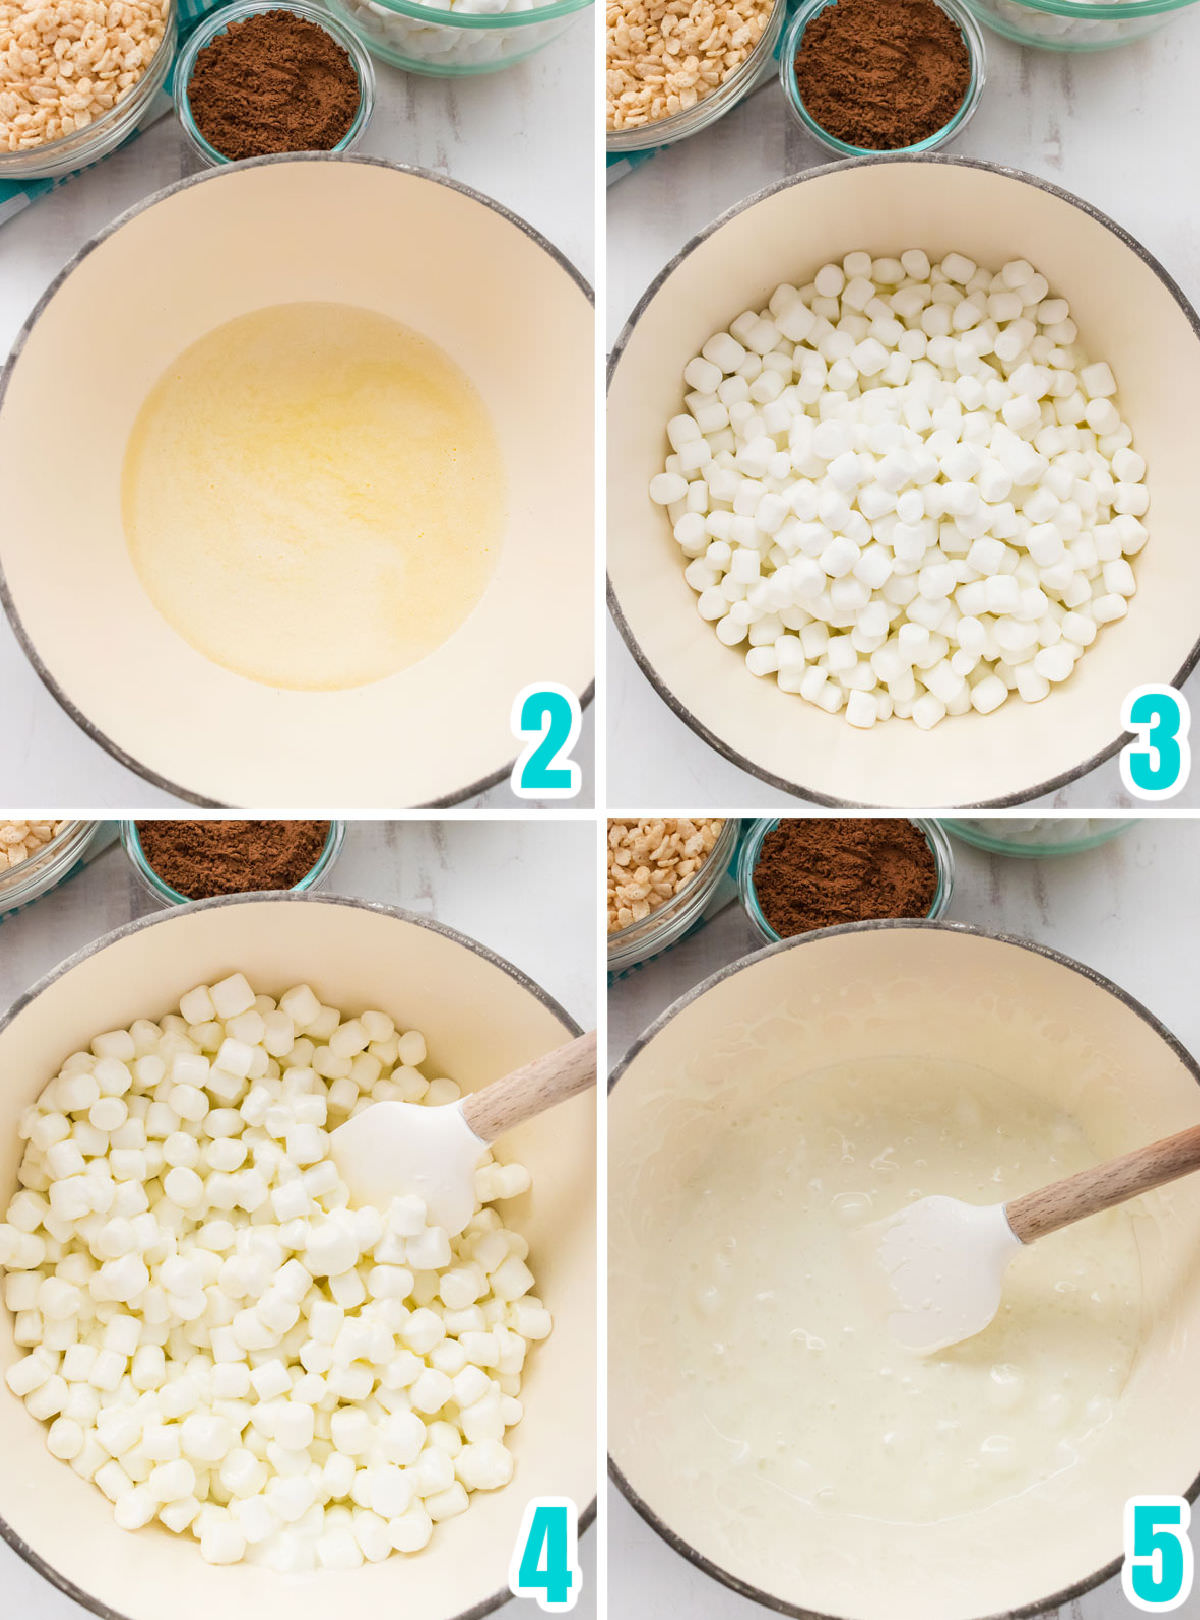 Collage image showing the steps on how to make the marshmallow mixture for the Chocolate Rice Krispie Treats.